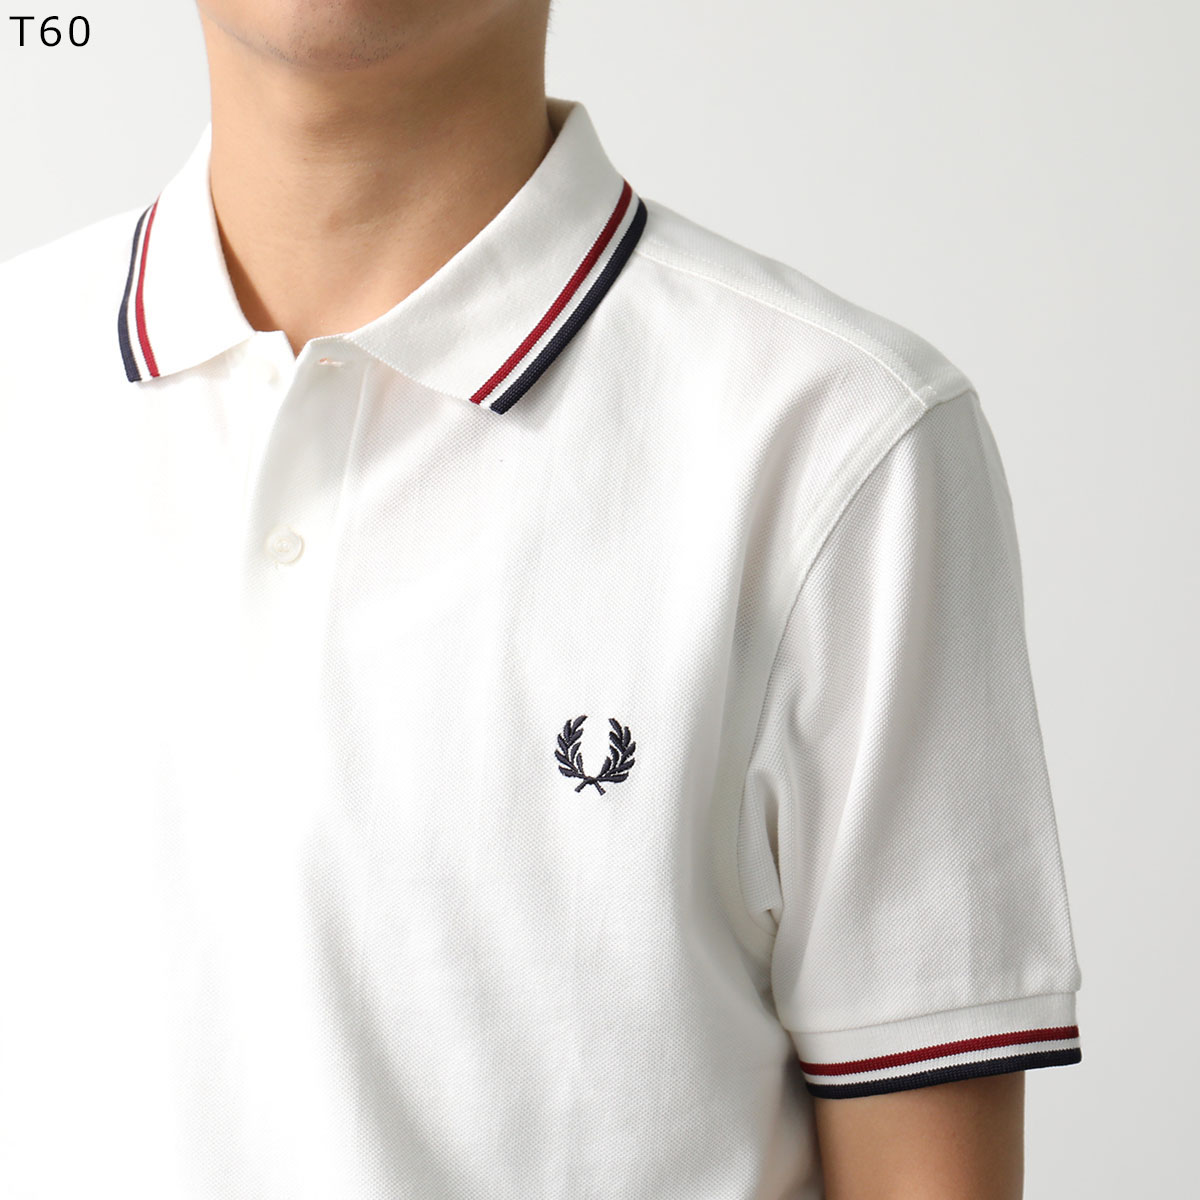 FRED PERRY ポロシャツ TWIN TIPPED FRED PERRY SHIRT M360...